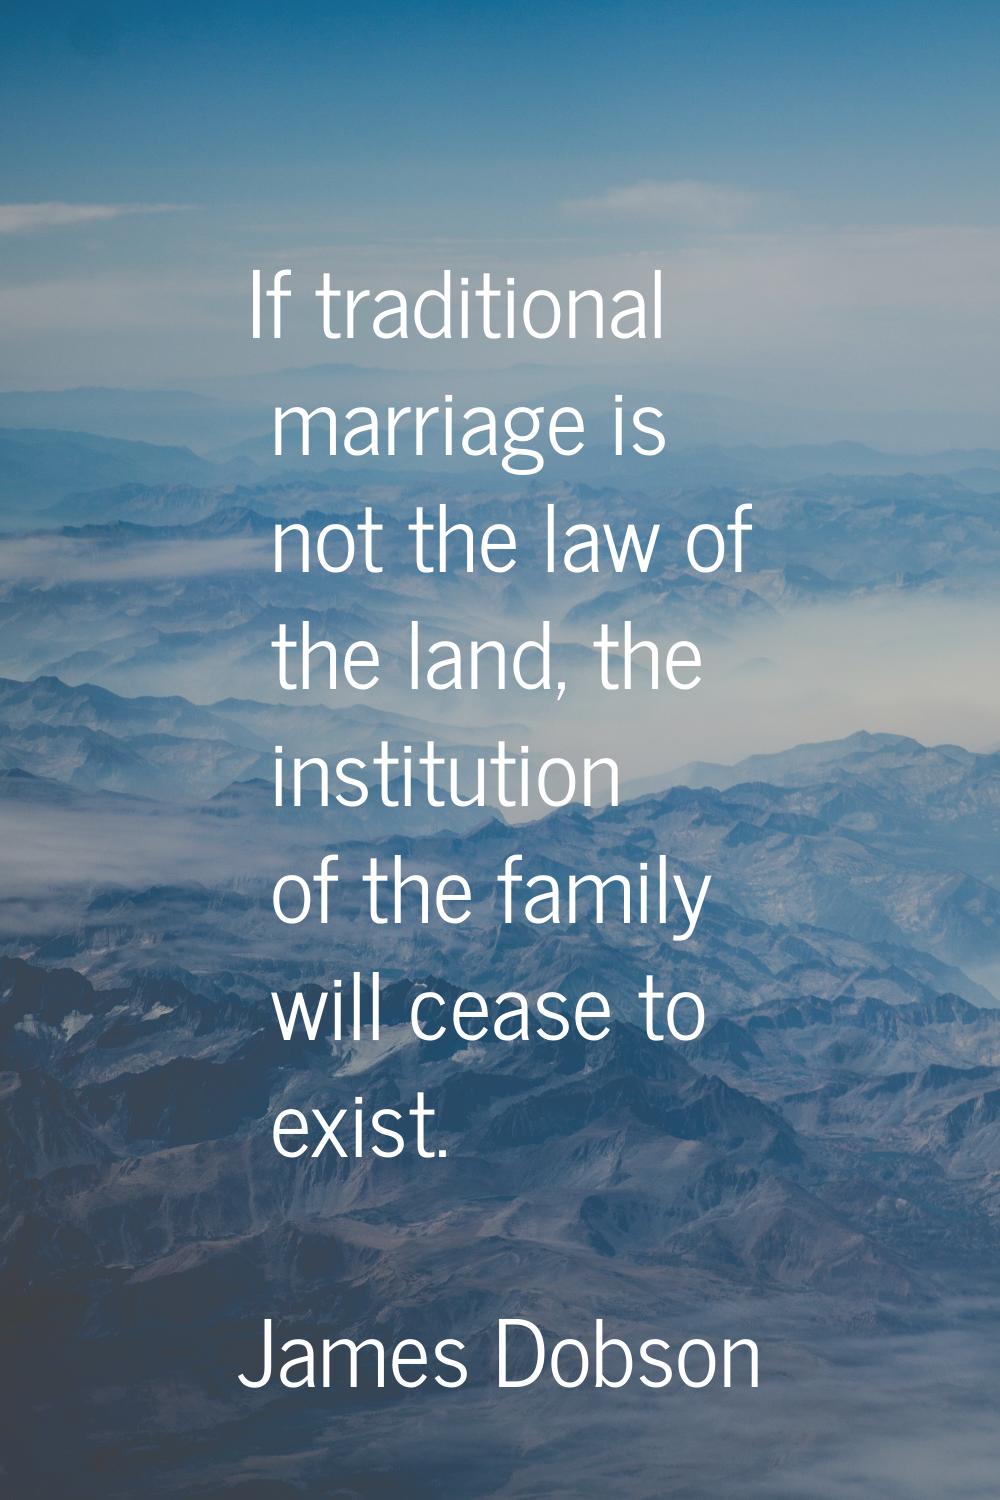 If traditional marriage is not the law of the land, the institution of the family will cease to exi